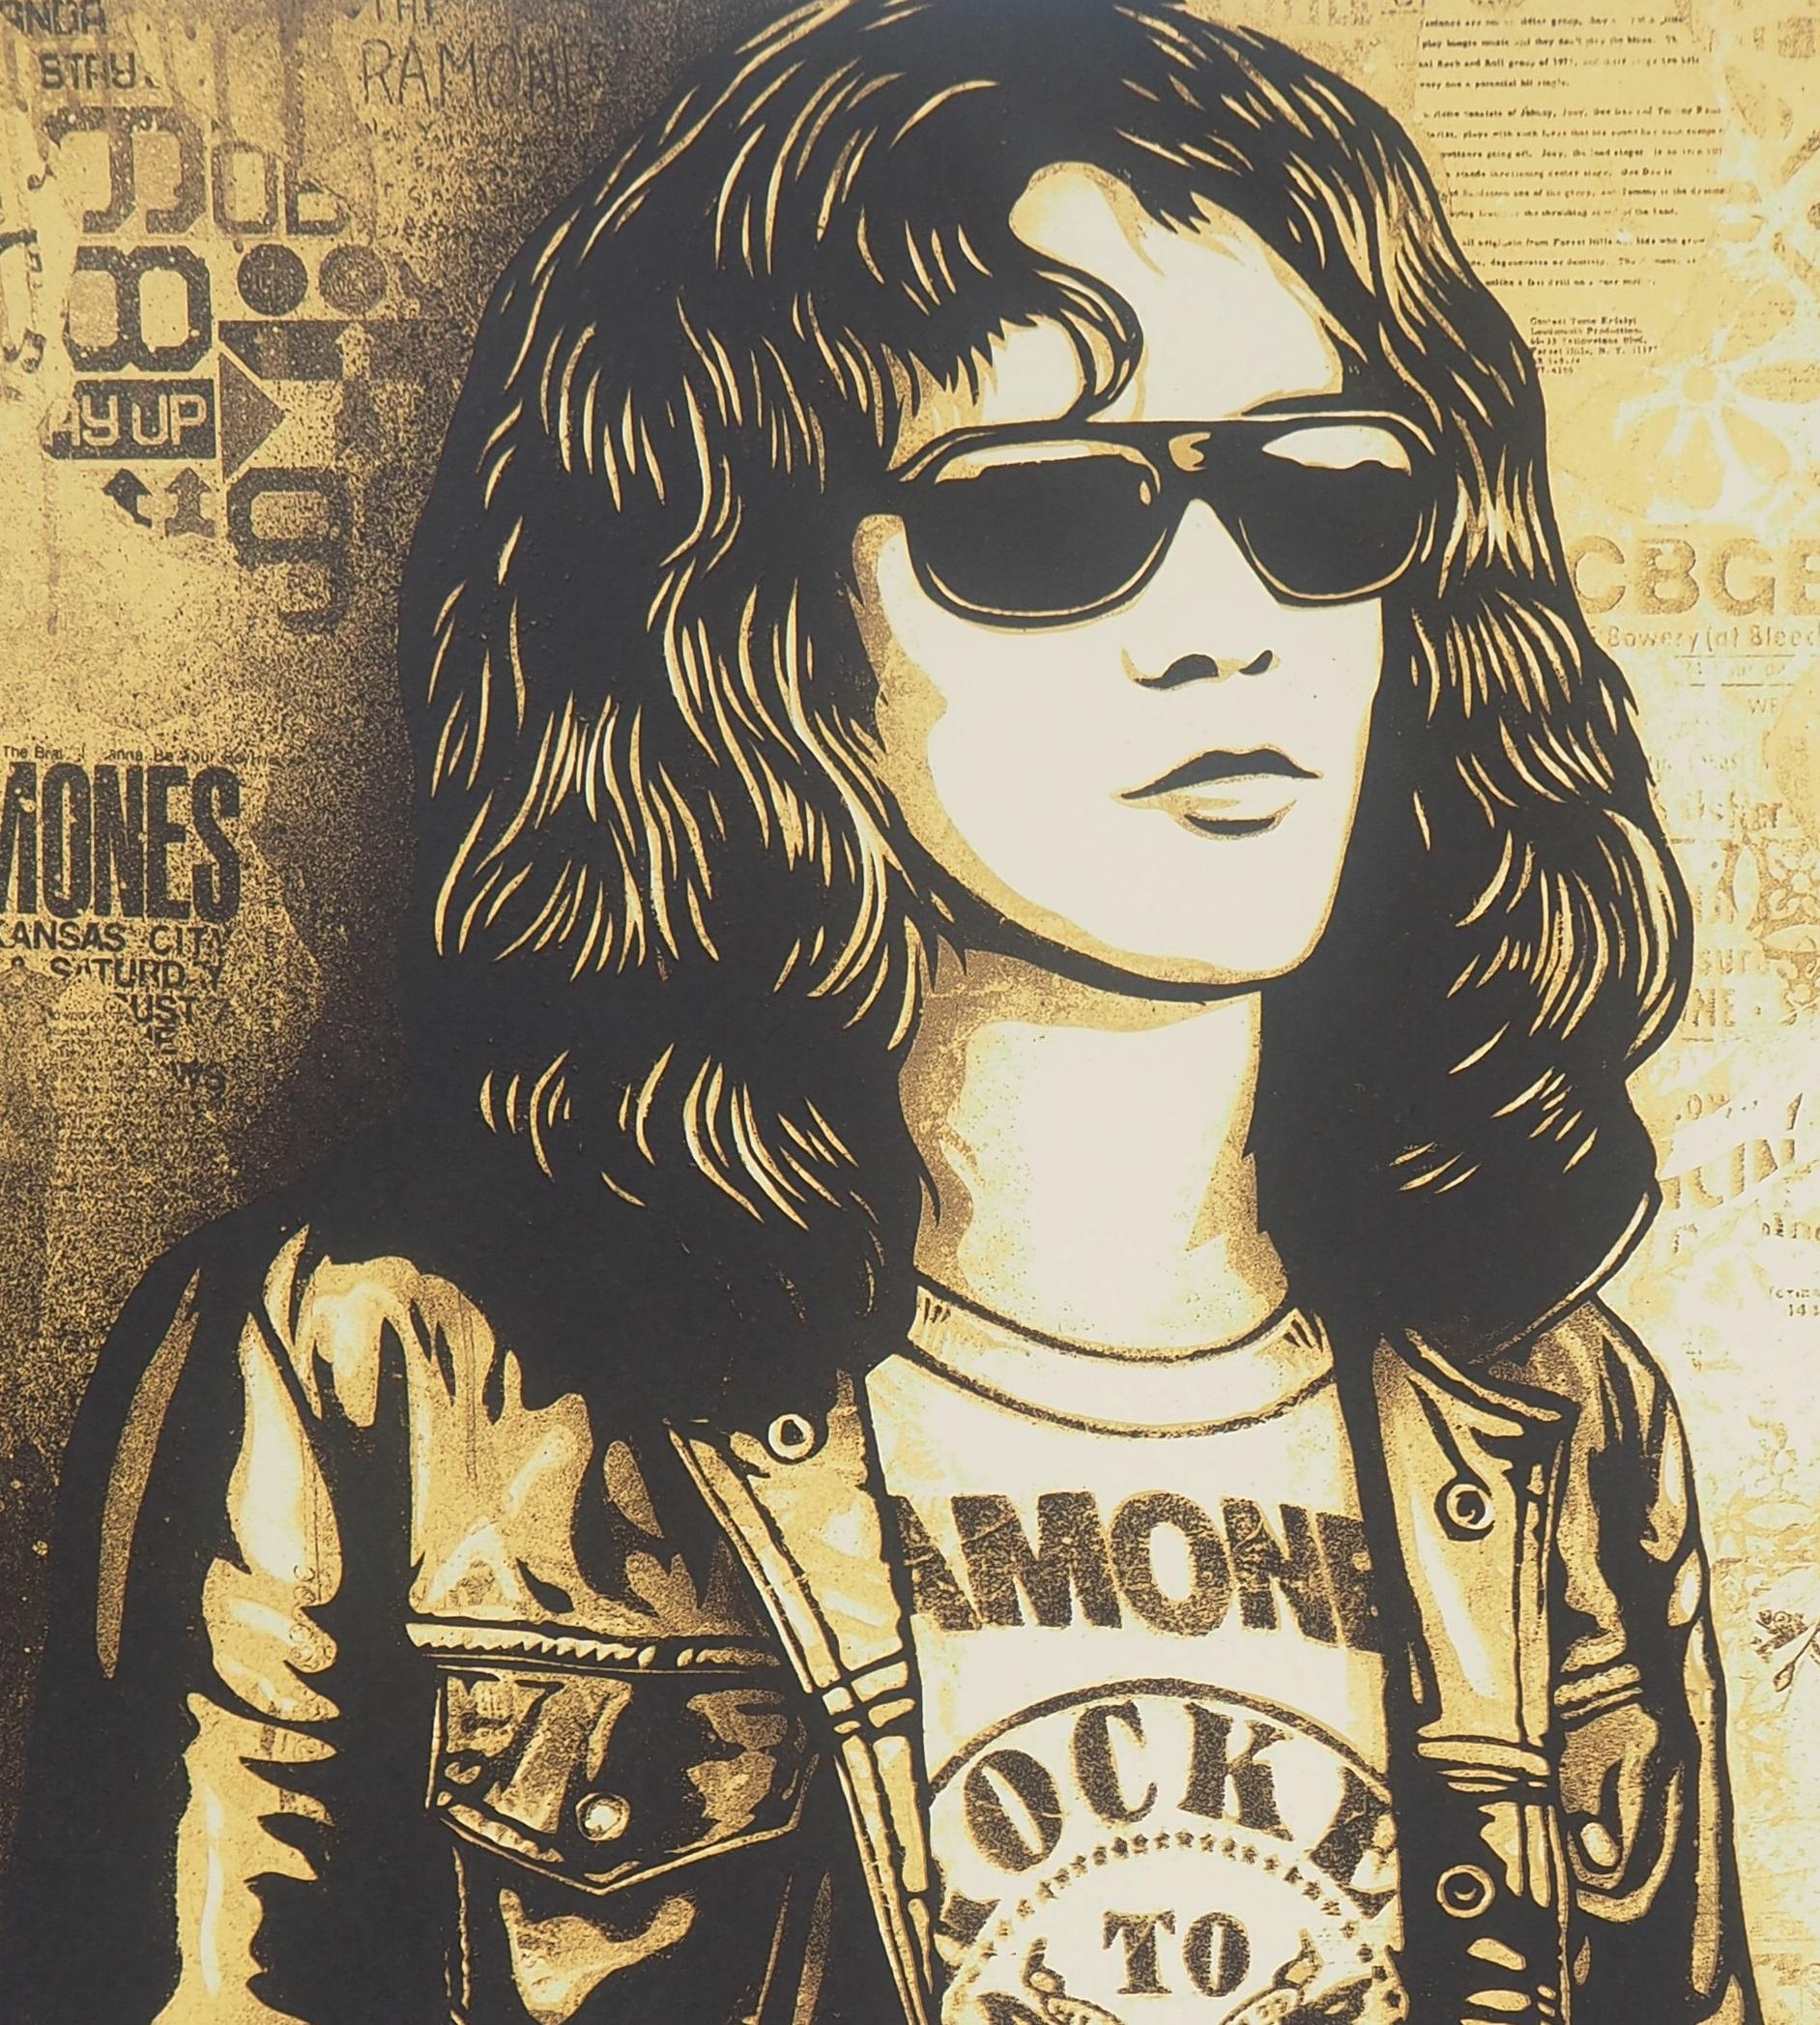 Shepard FAIREY 
Ramone Collage (Gold)

Original screen print (serigraphy)
Handsigned in pencil
Numbered /350 copies
On cream paper 61 x 46 cm (c. 24 x 18 inch)

Excellent condition